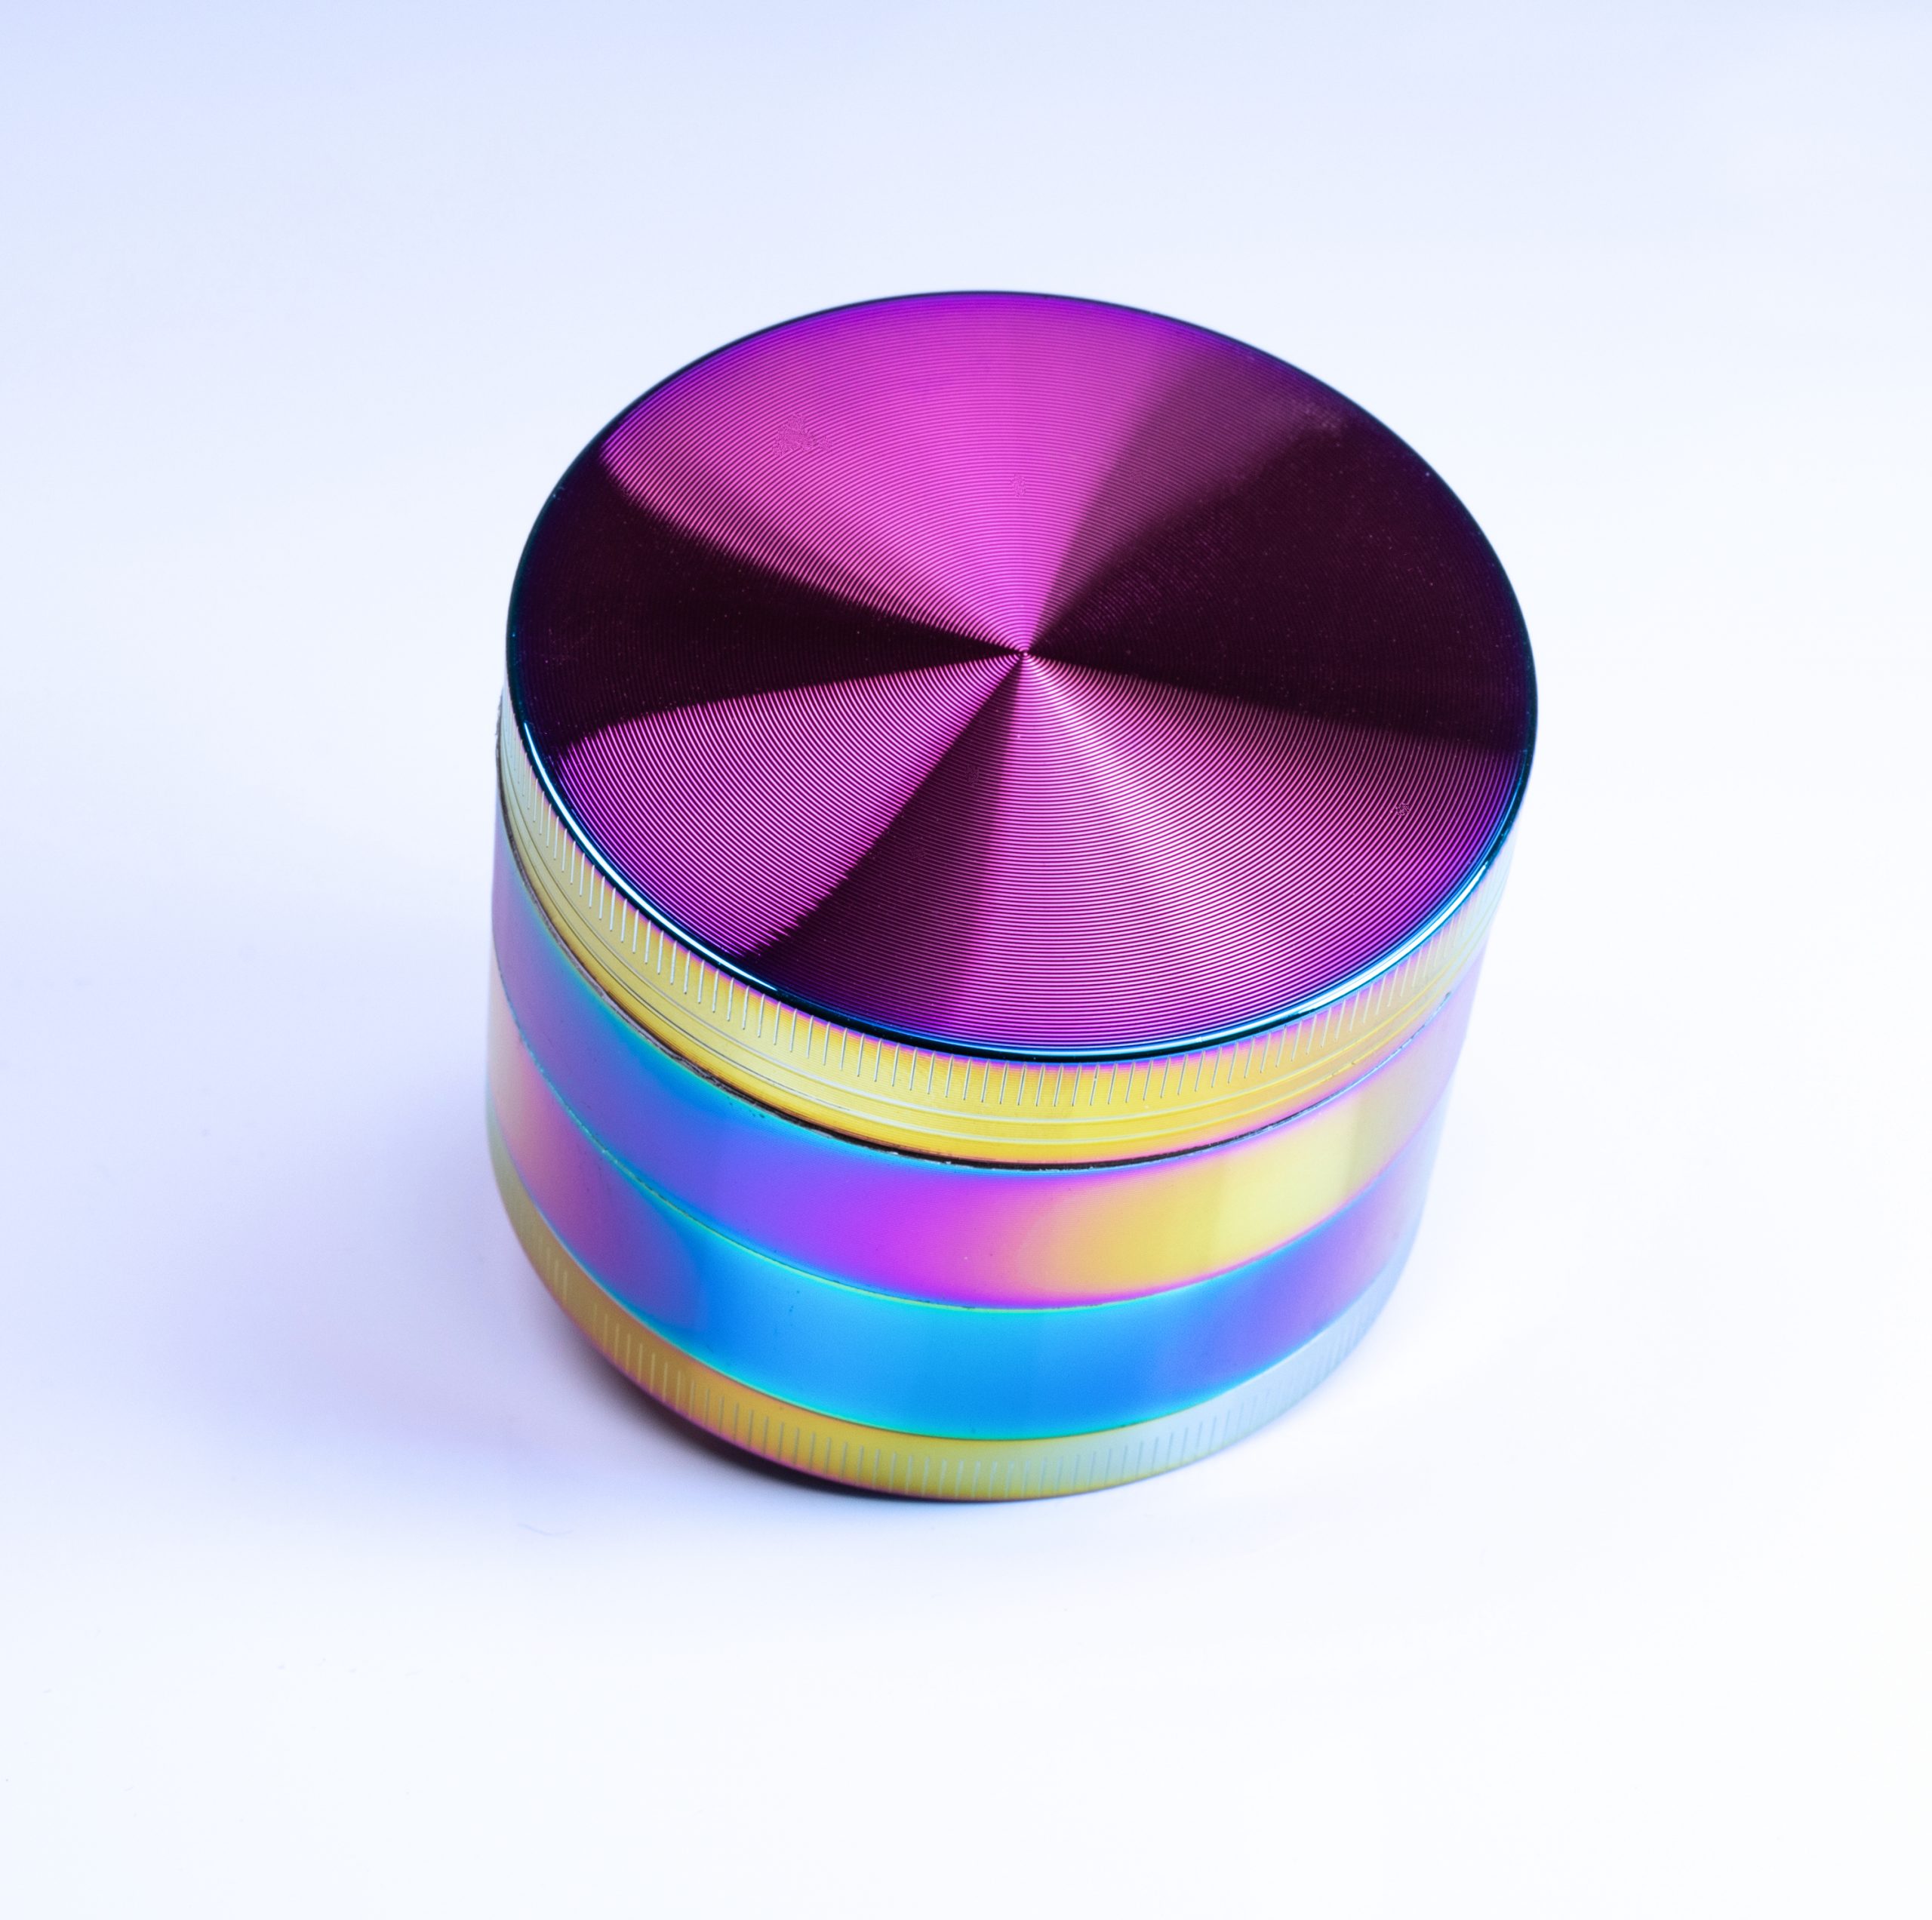 63×44mm Vicyuns Colorful Grinder Zinc Alloy Rainbow Grinder Pollen 4 Pieces Herb Grinder With Magnetic Top 